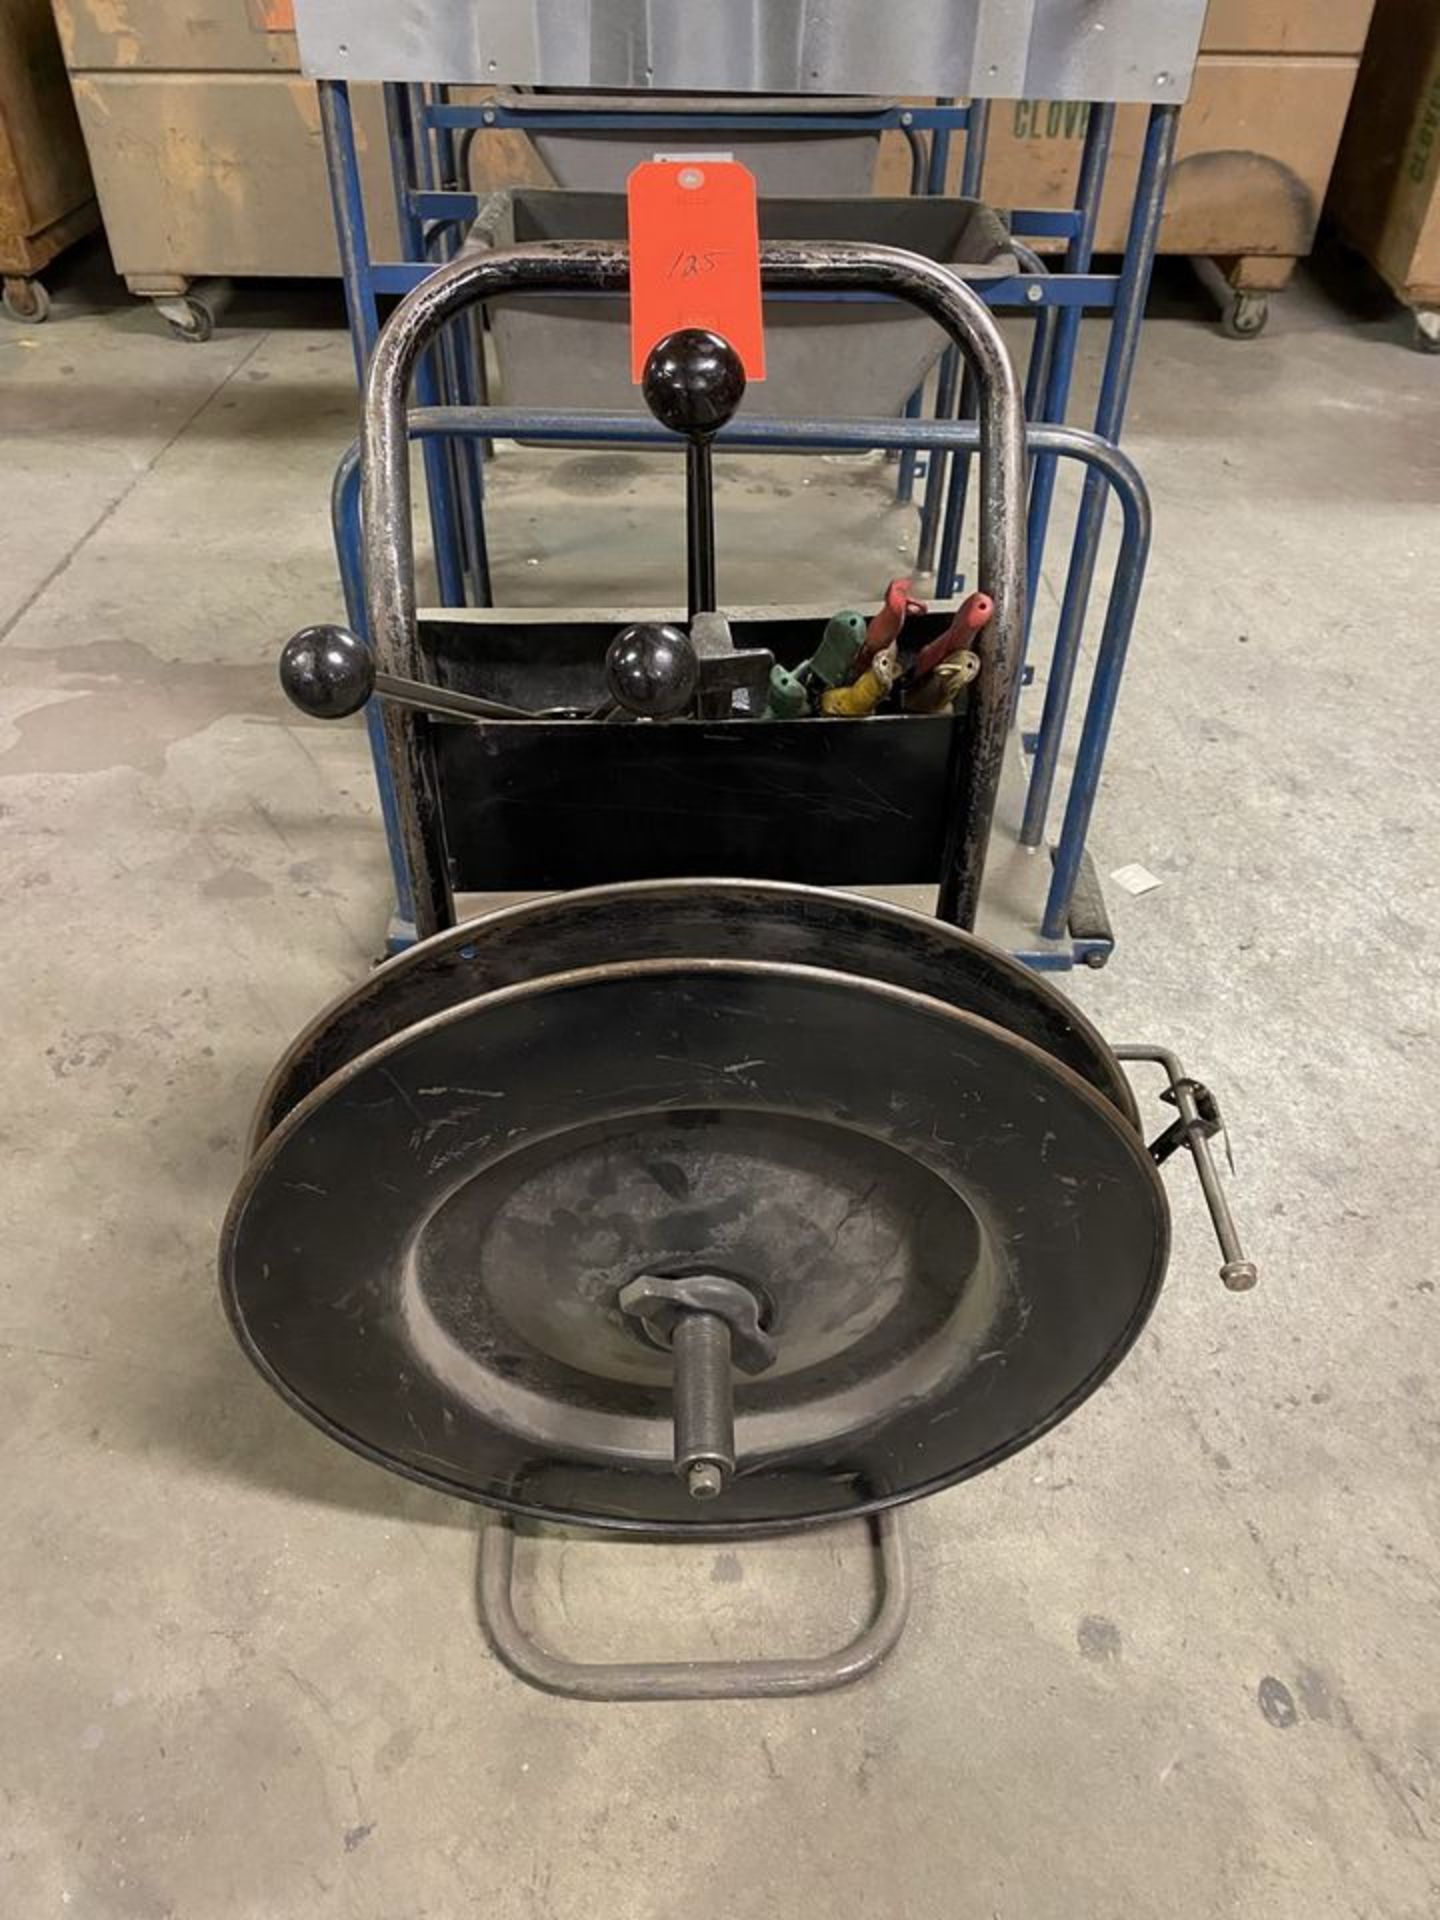 Portable Banding Cart; with Available Tools, Consisting of: Bander, Crimper, and (2) Metal Band